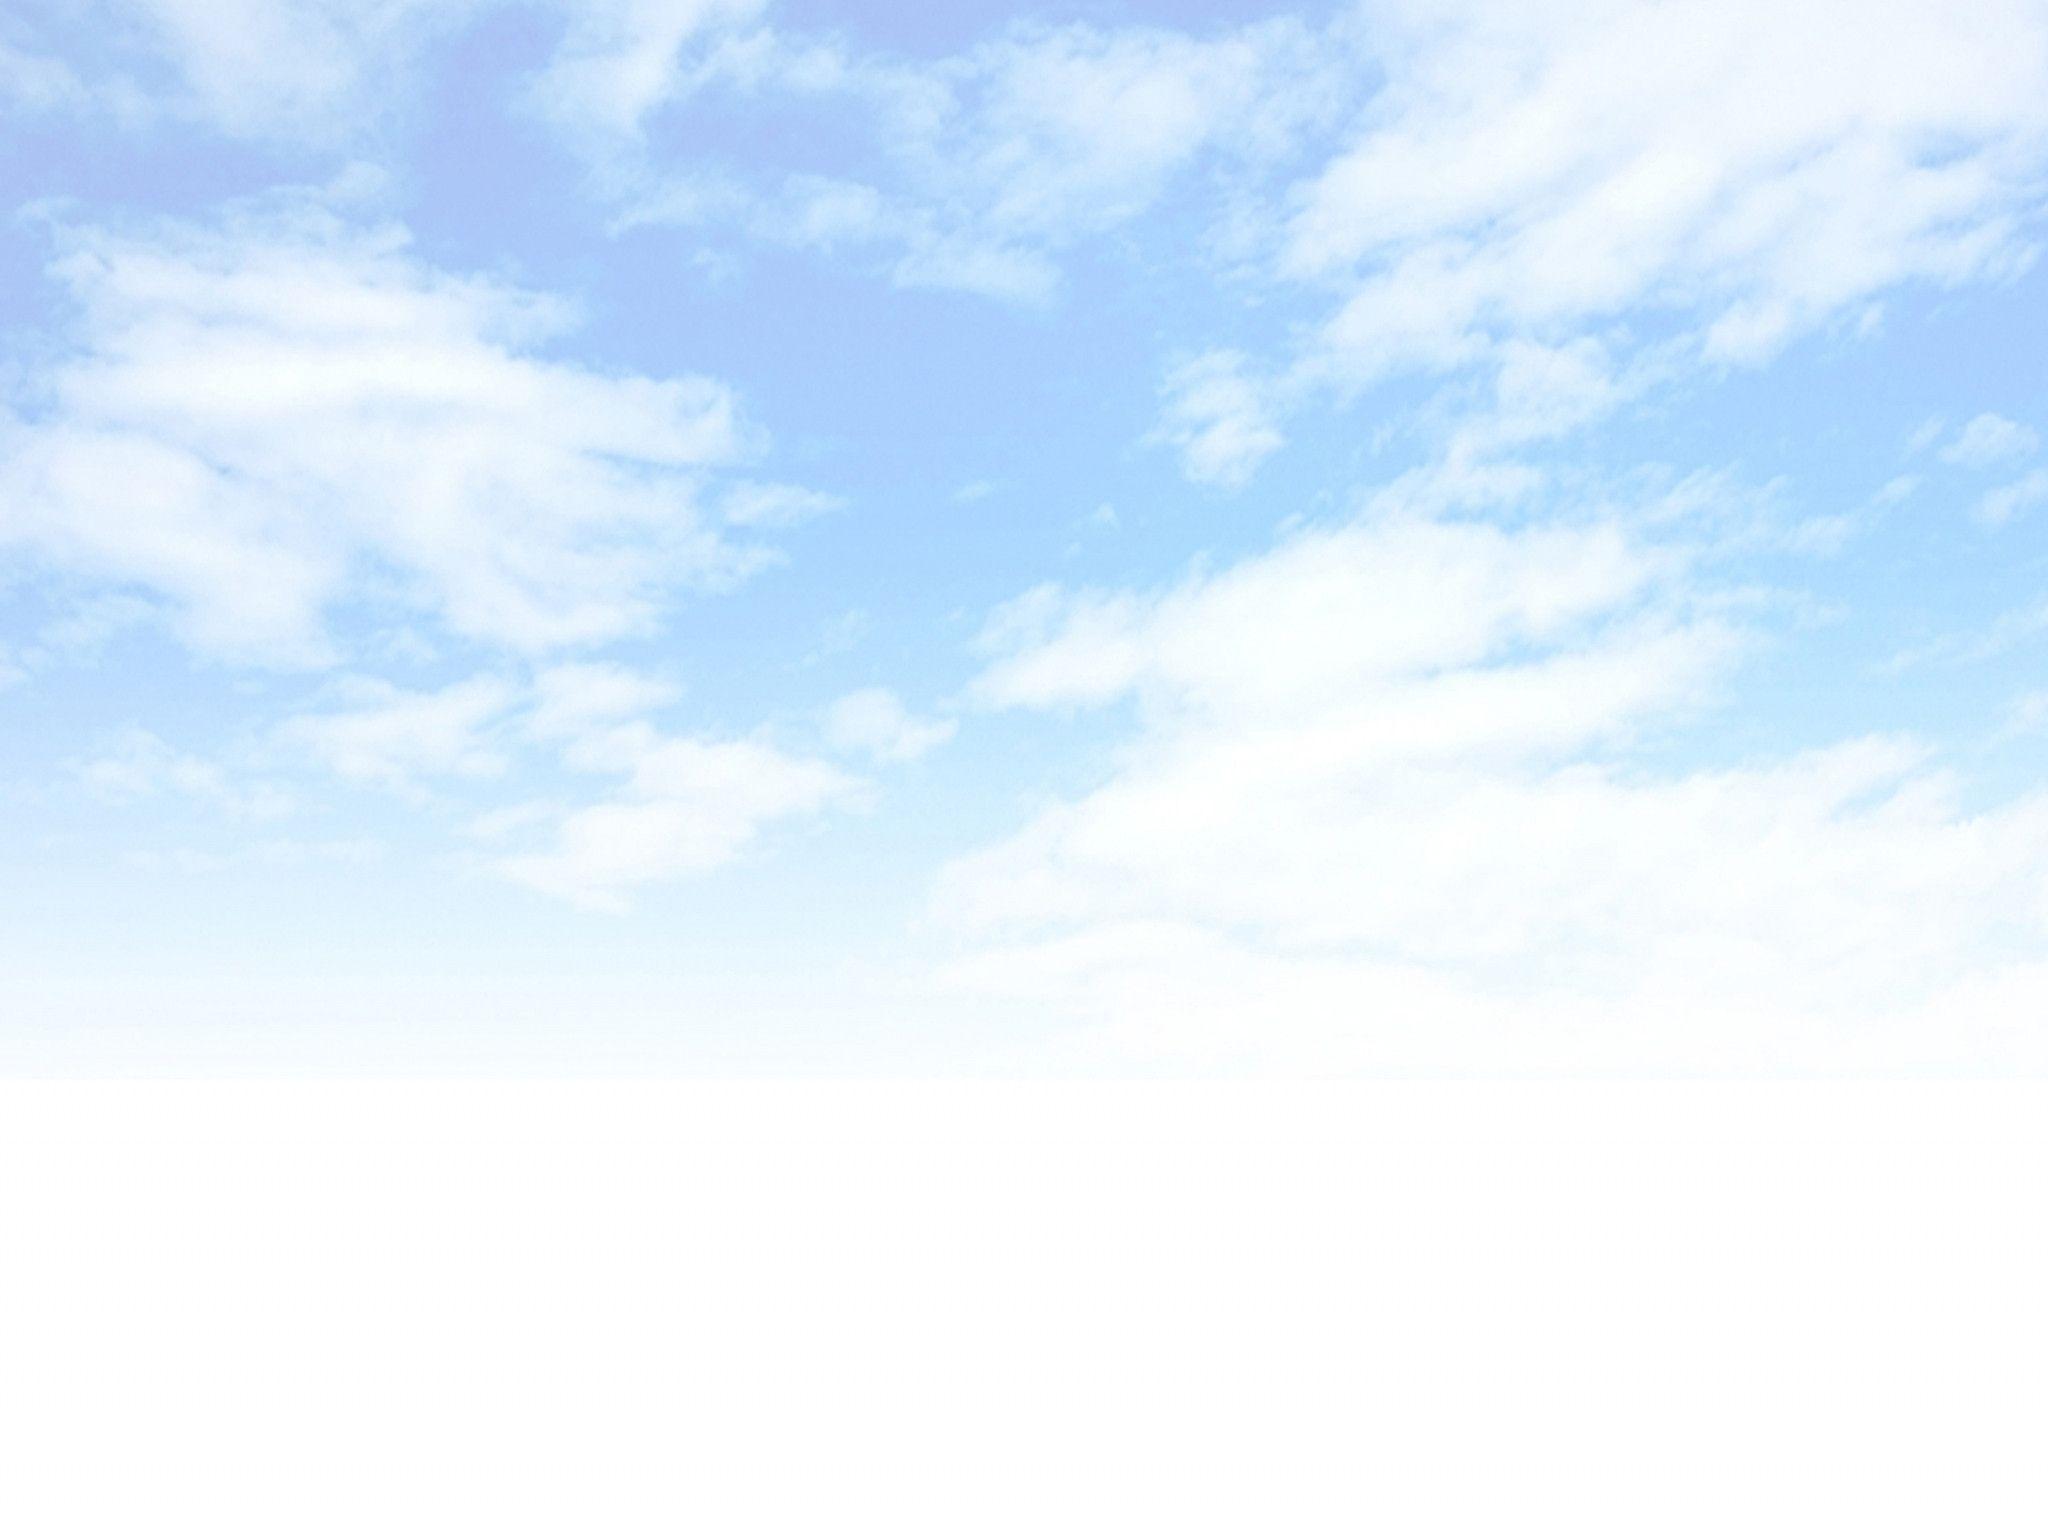 Free Download cloud background resized3 vail blue sky limo